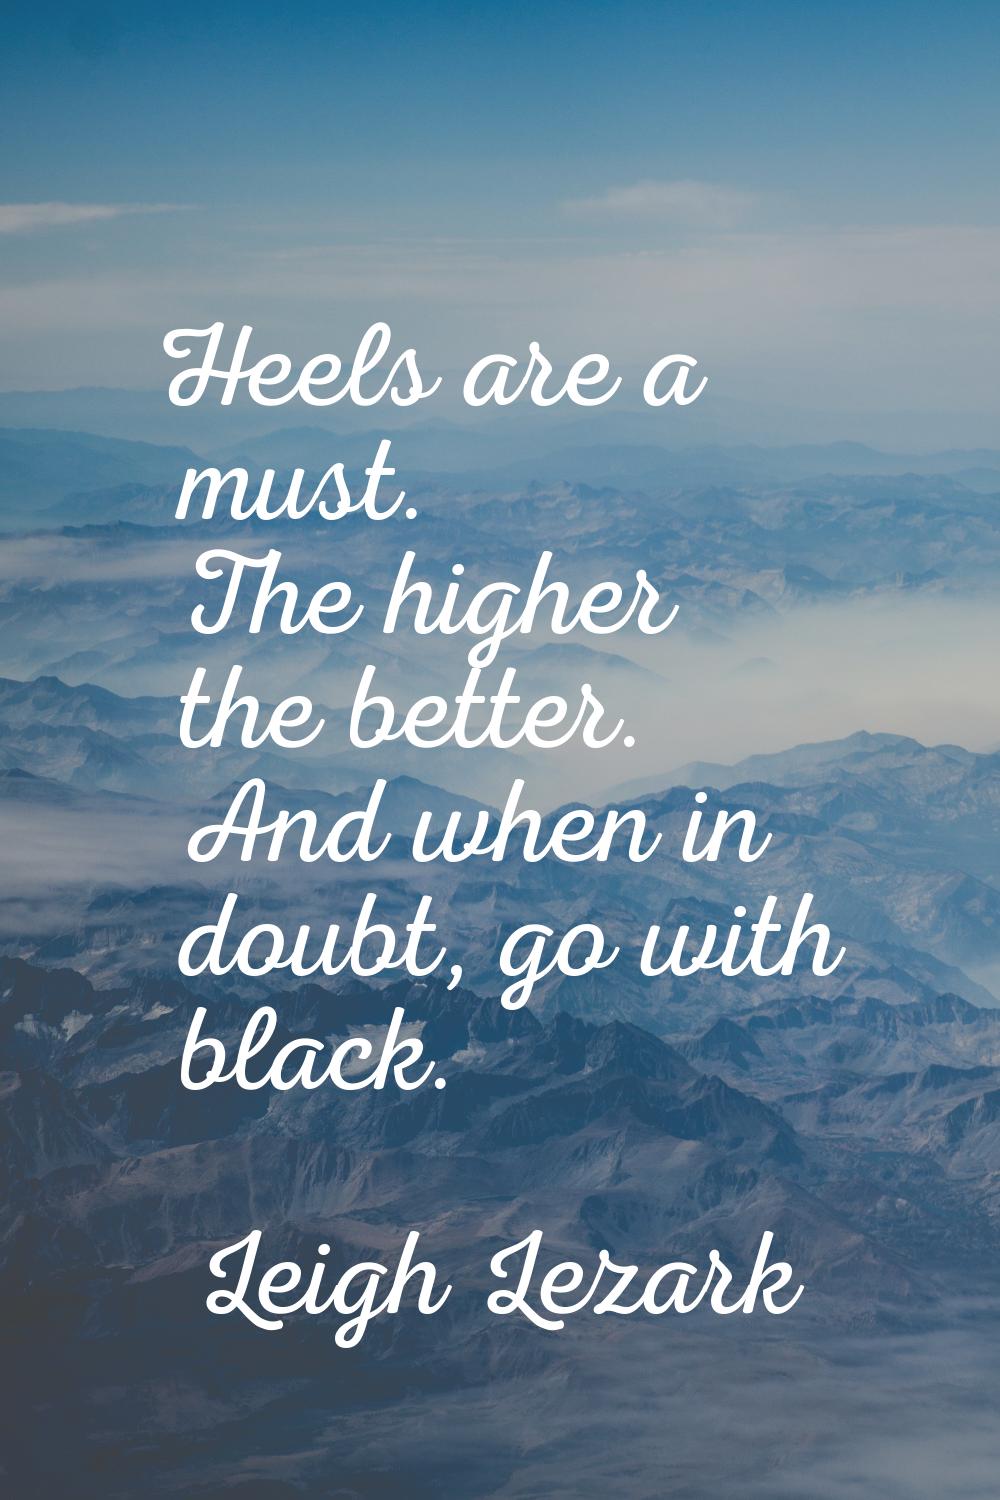 Heels are a must. The higher the better. And when in doubt, go with black.